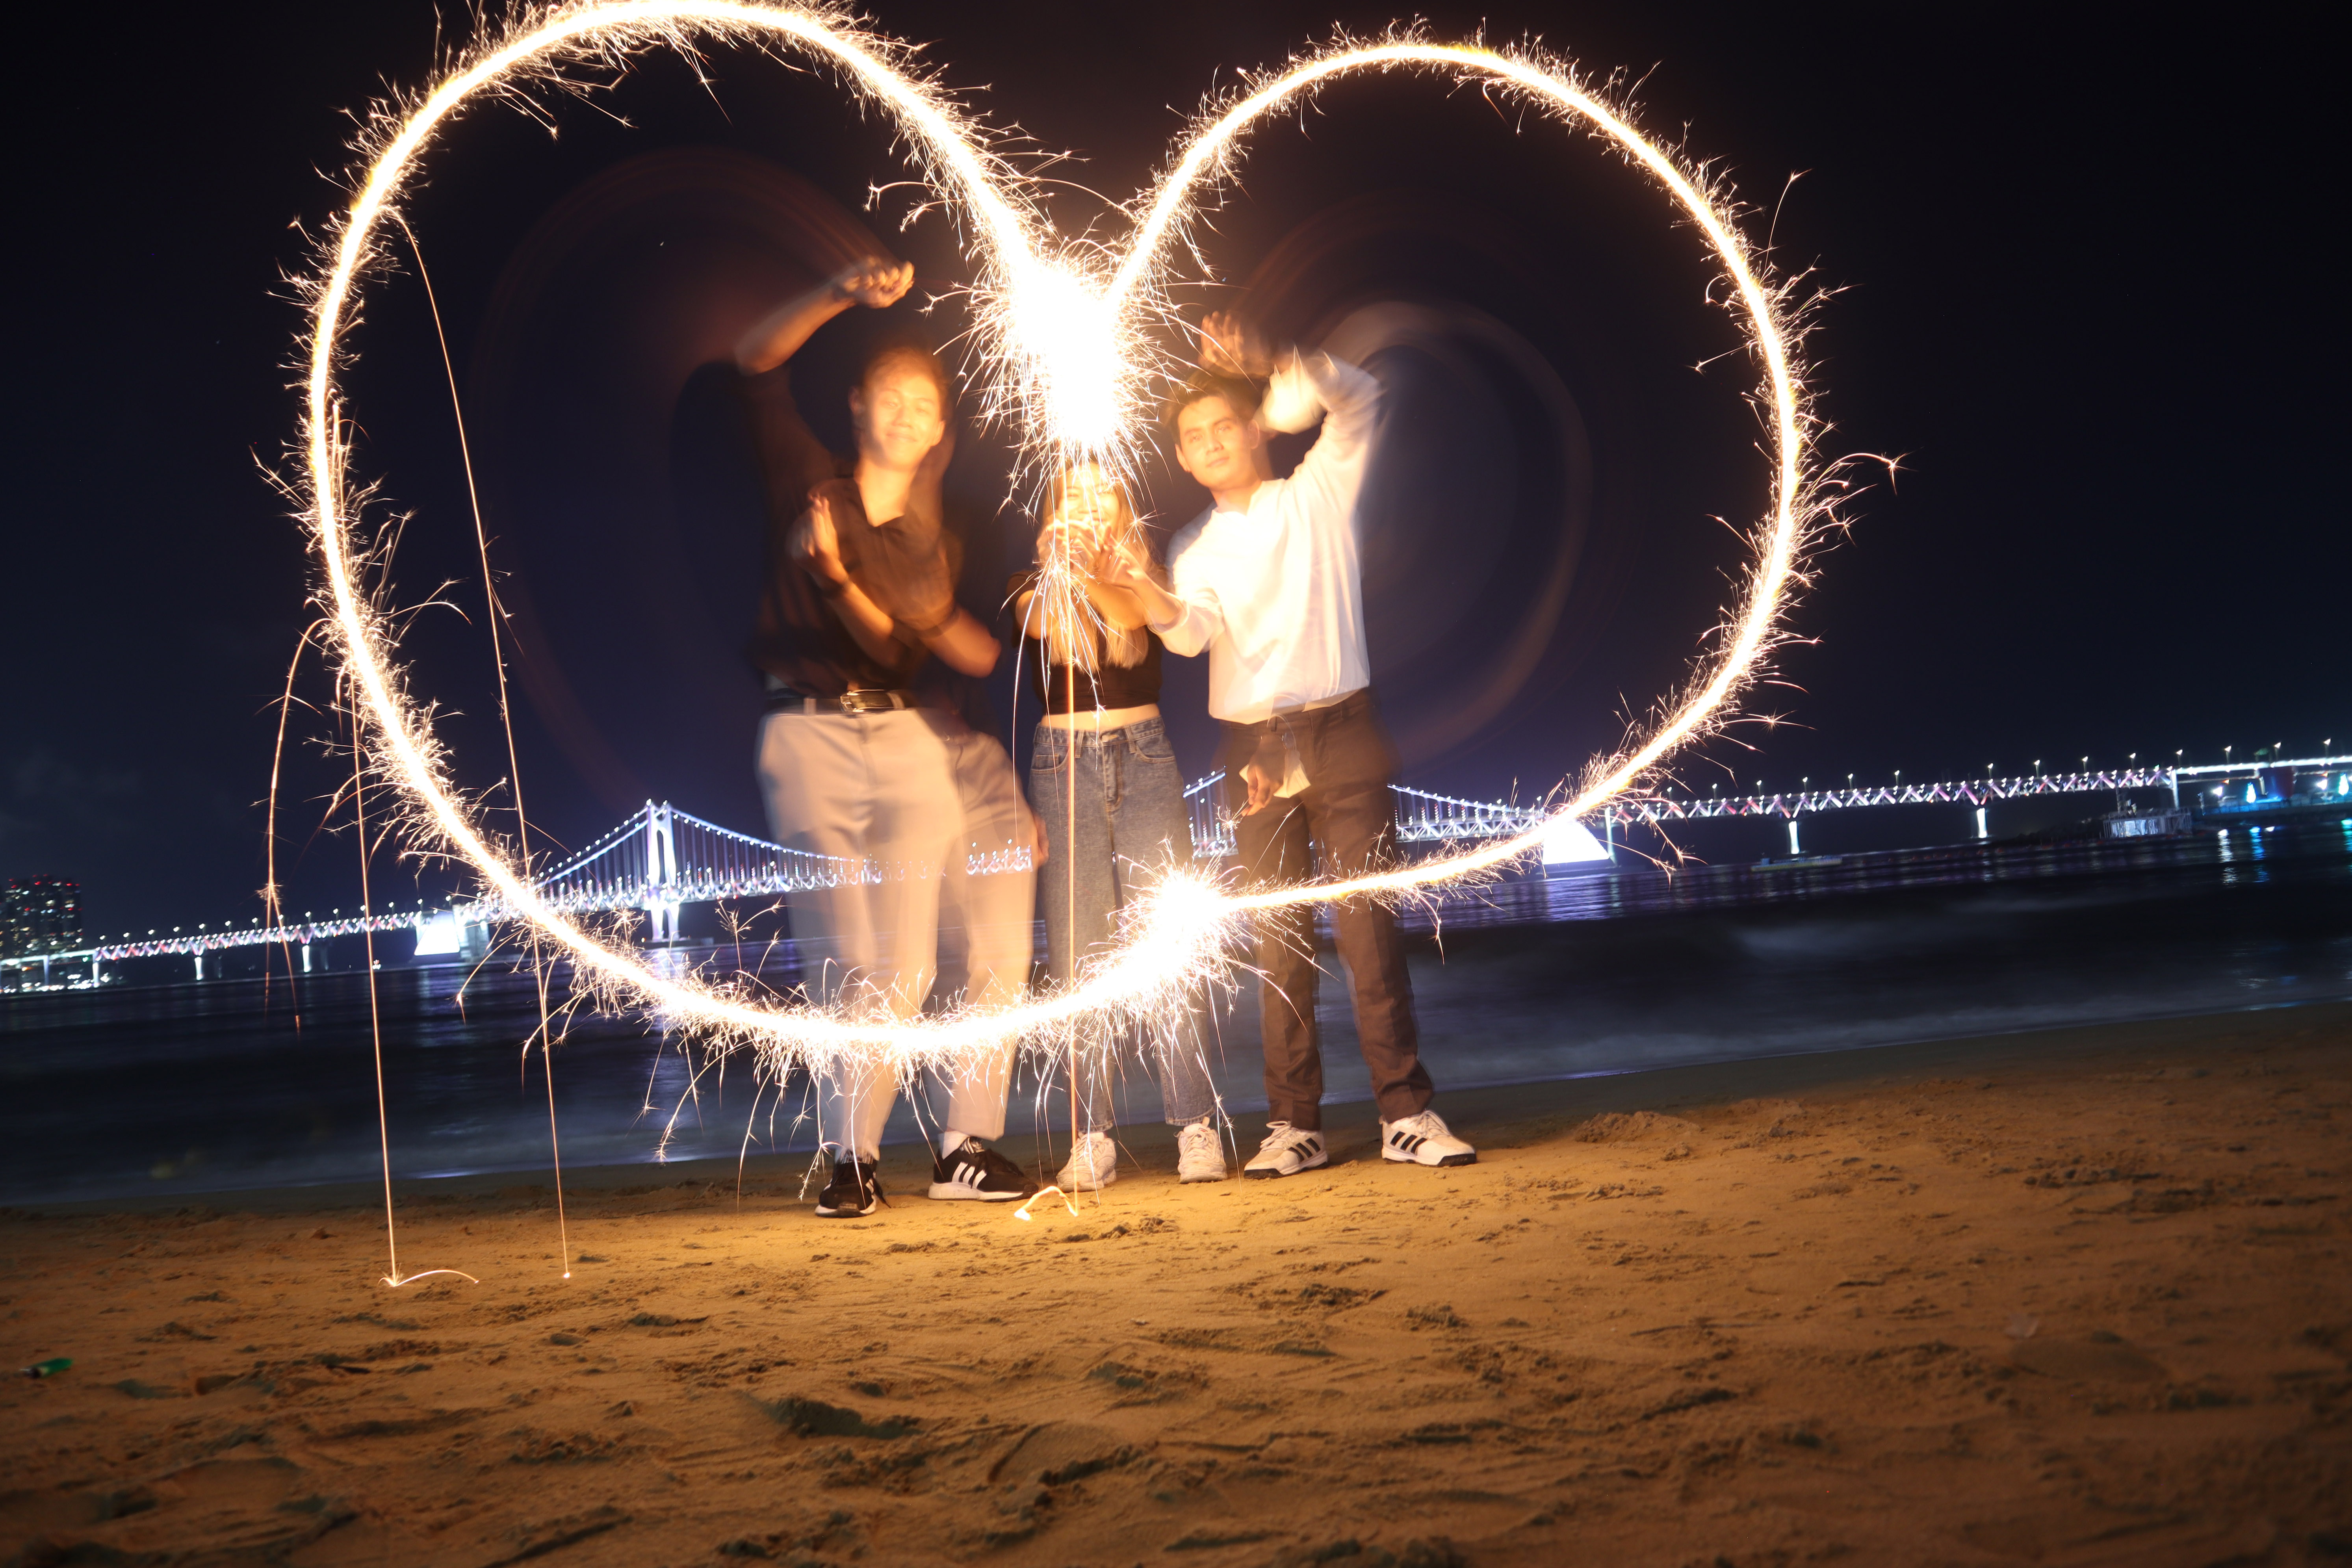 Photo of three students, at night, attempting to make a heart shape with fireworks.